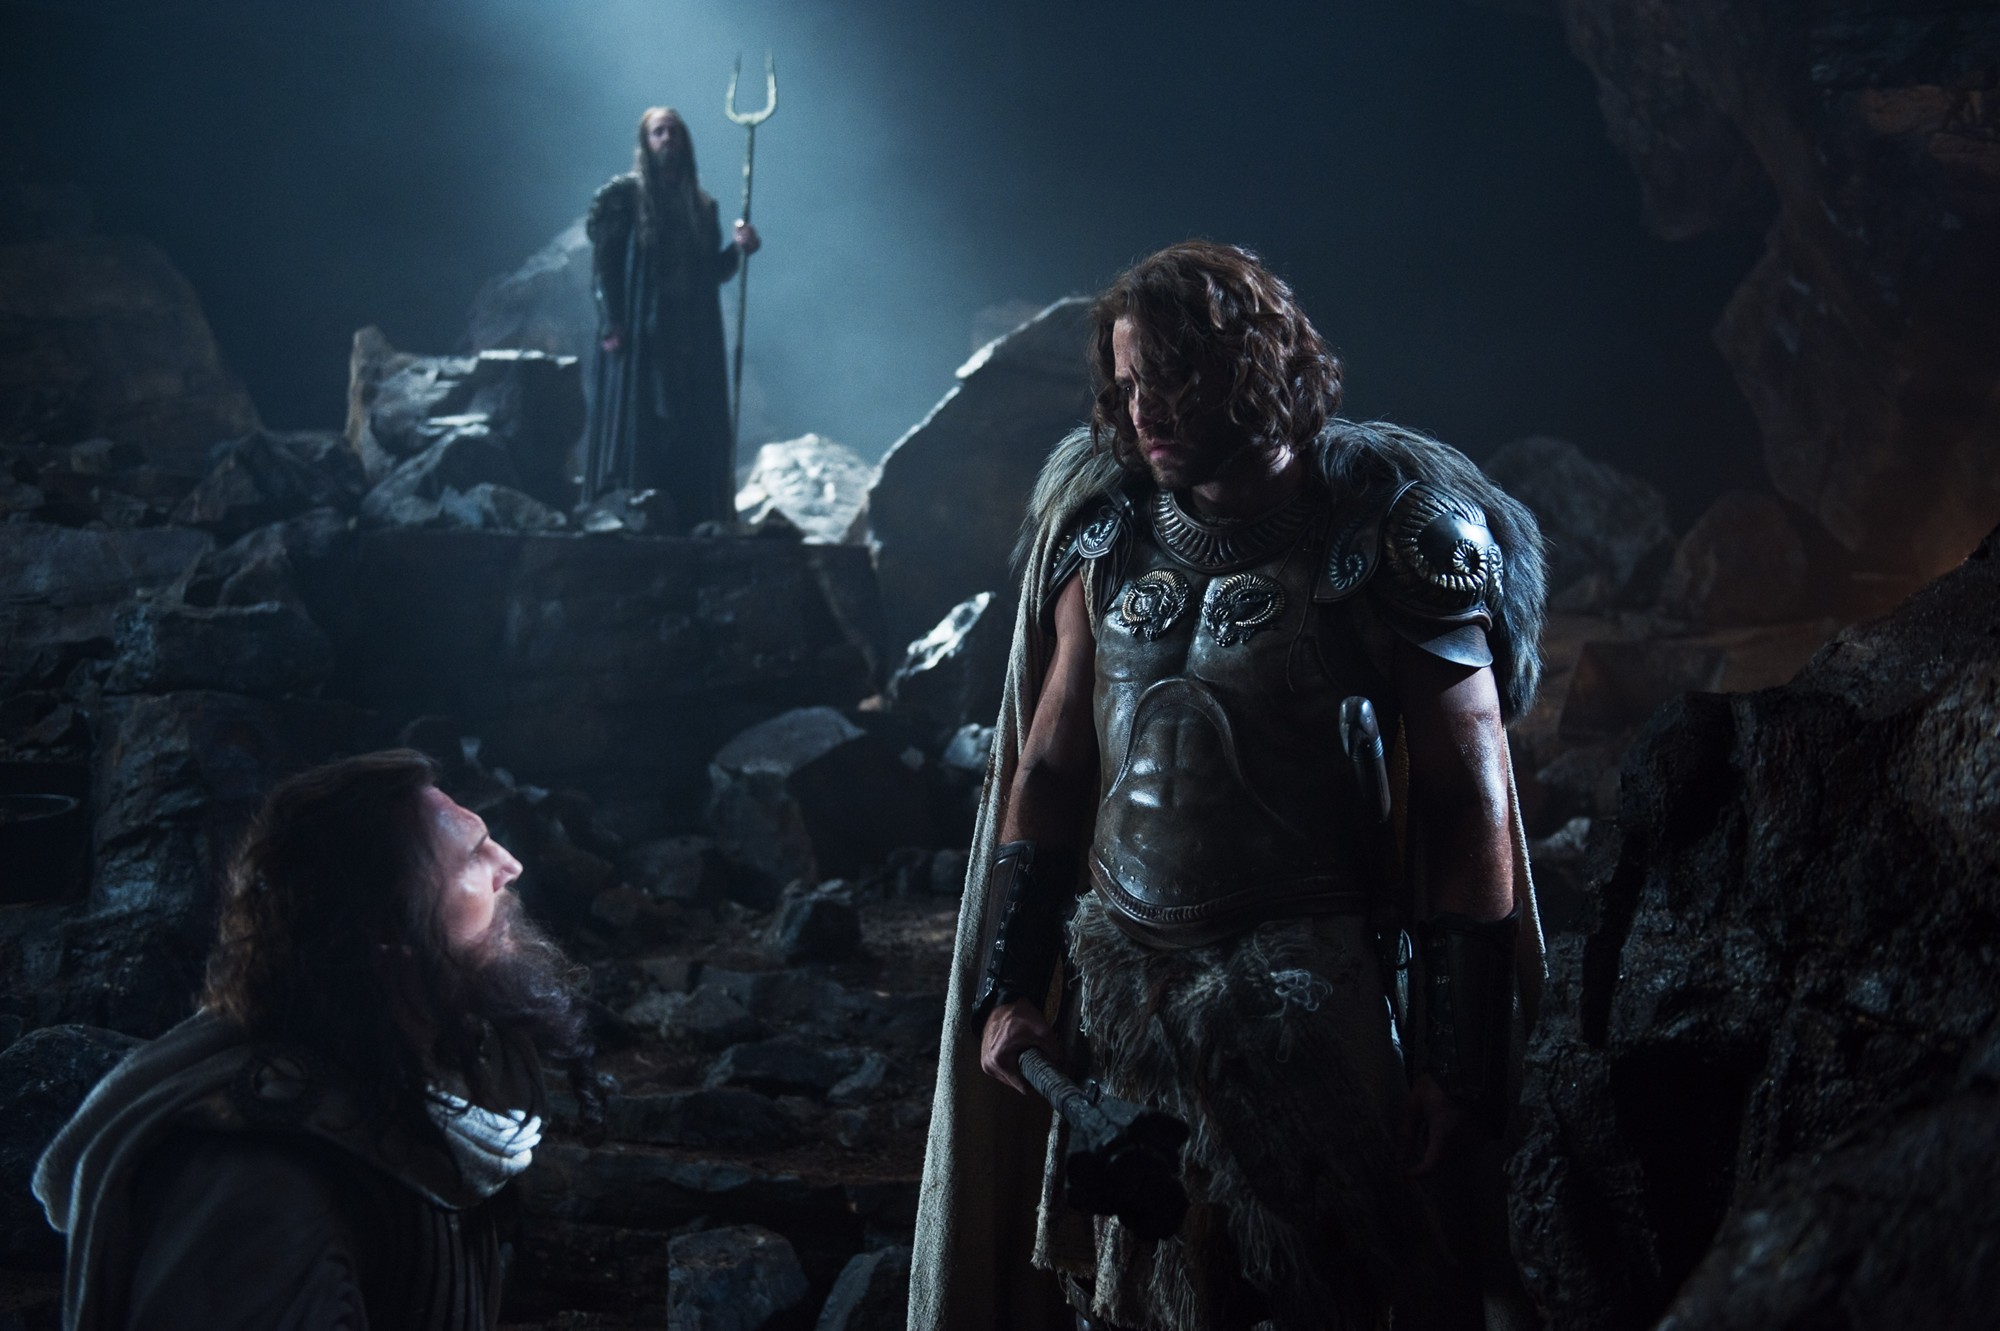 Liam Neeson stars as Zeus and Edgar Ramirez stars as Ares in Warner Bros. Pictures' Wrath of the Titans (2012). Photo credit by Jay Maidment.